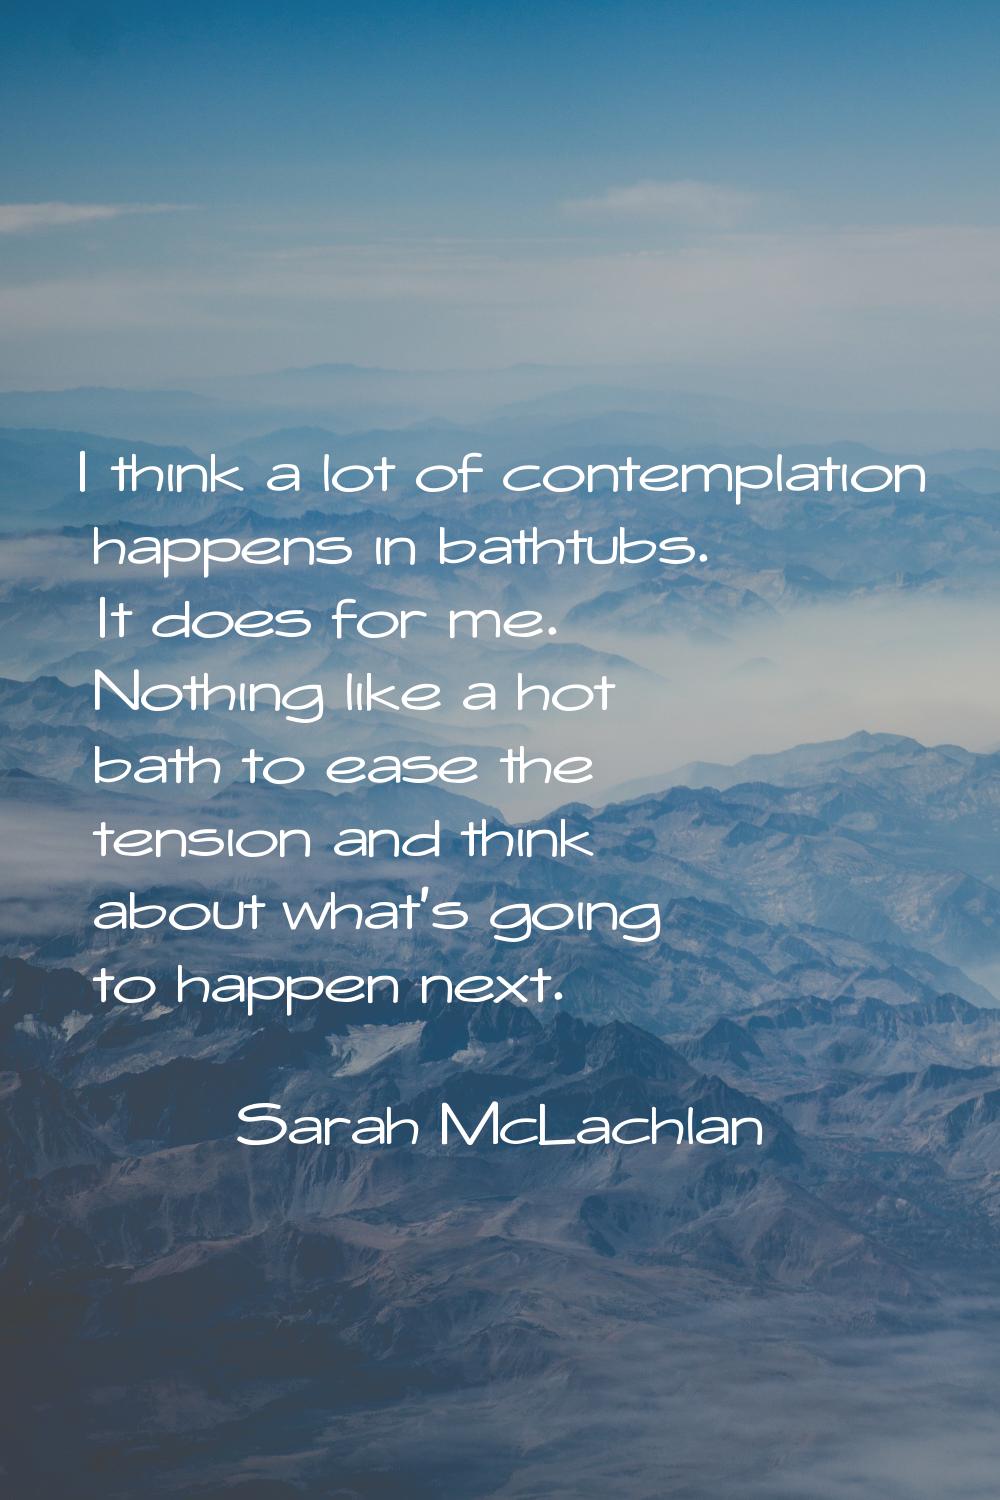 I think a lot of contemplation happens in bathtubs. It does for me. Nothing like a hot bath to ease